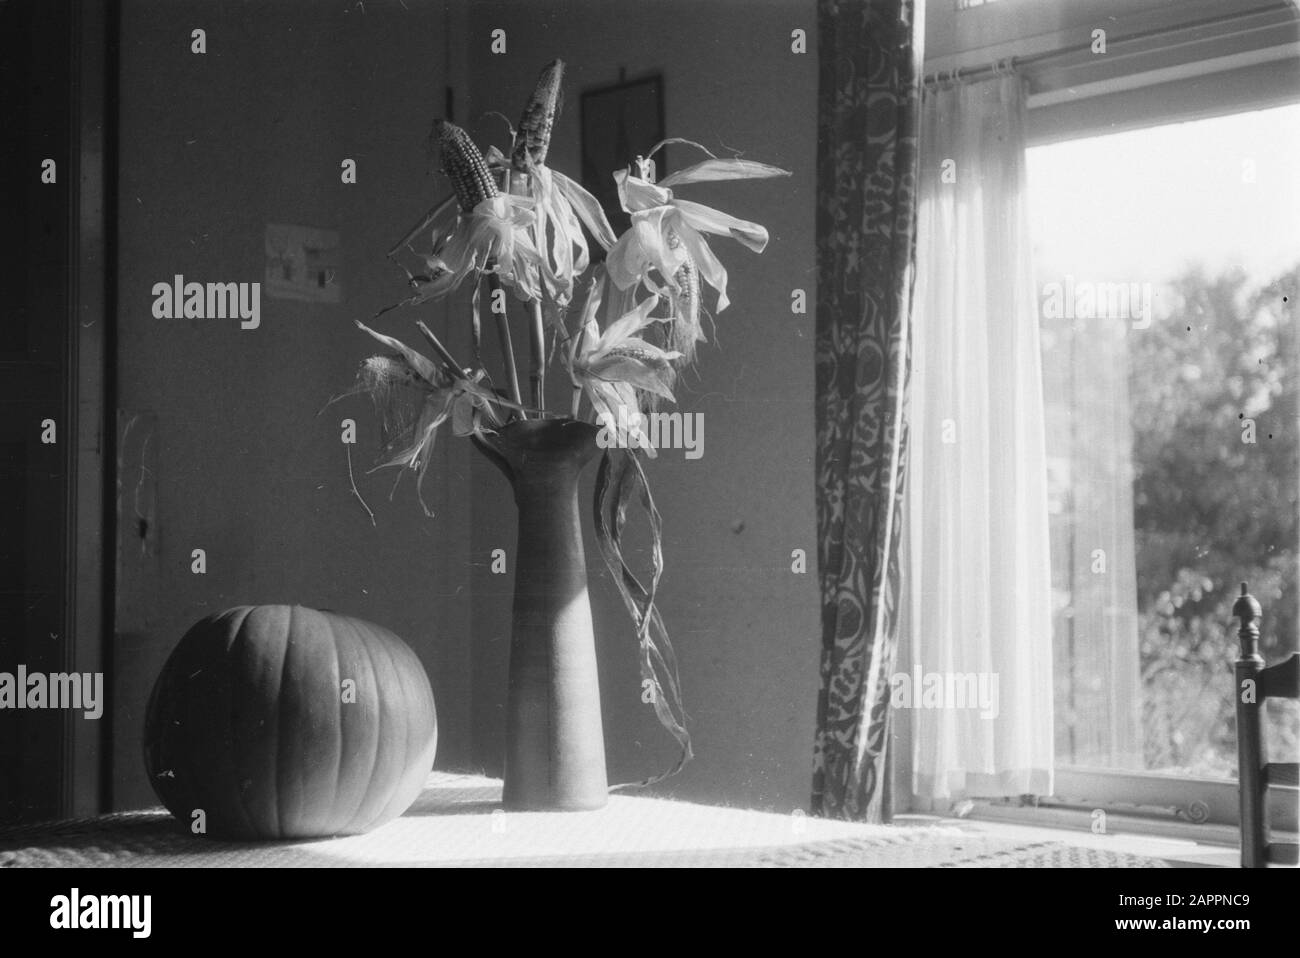 Interior of the course building on the Dalweg of the Nederlandse Heidemaatschappij in Arnhem Annotation: Still life with pumpkin and vase with flowers. Does not seem like a course building but a dwelling Date: 1950 Location: Arnhem, Gelderland Keywords: flower vase, course buildings, interior, pumpkins Stock Photo